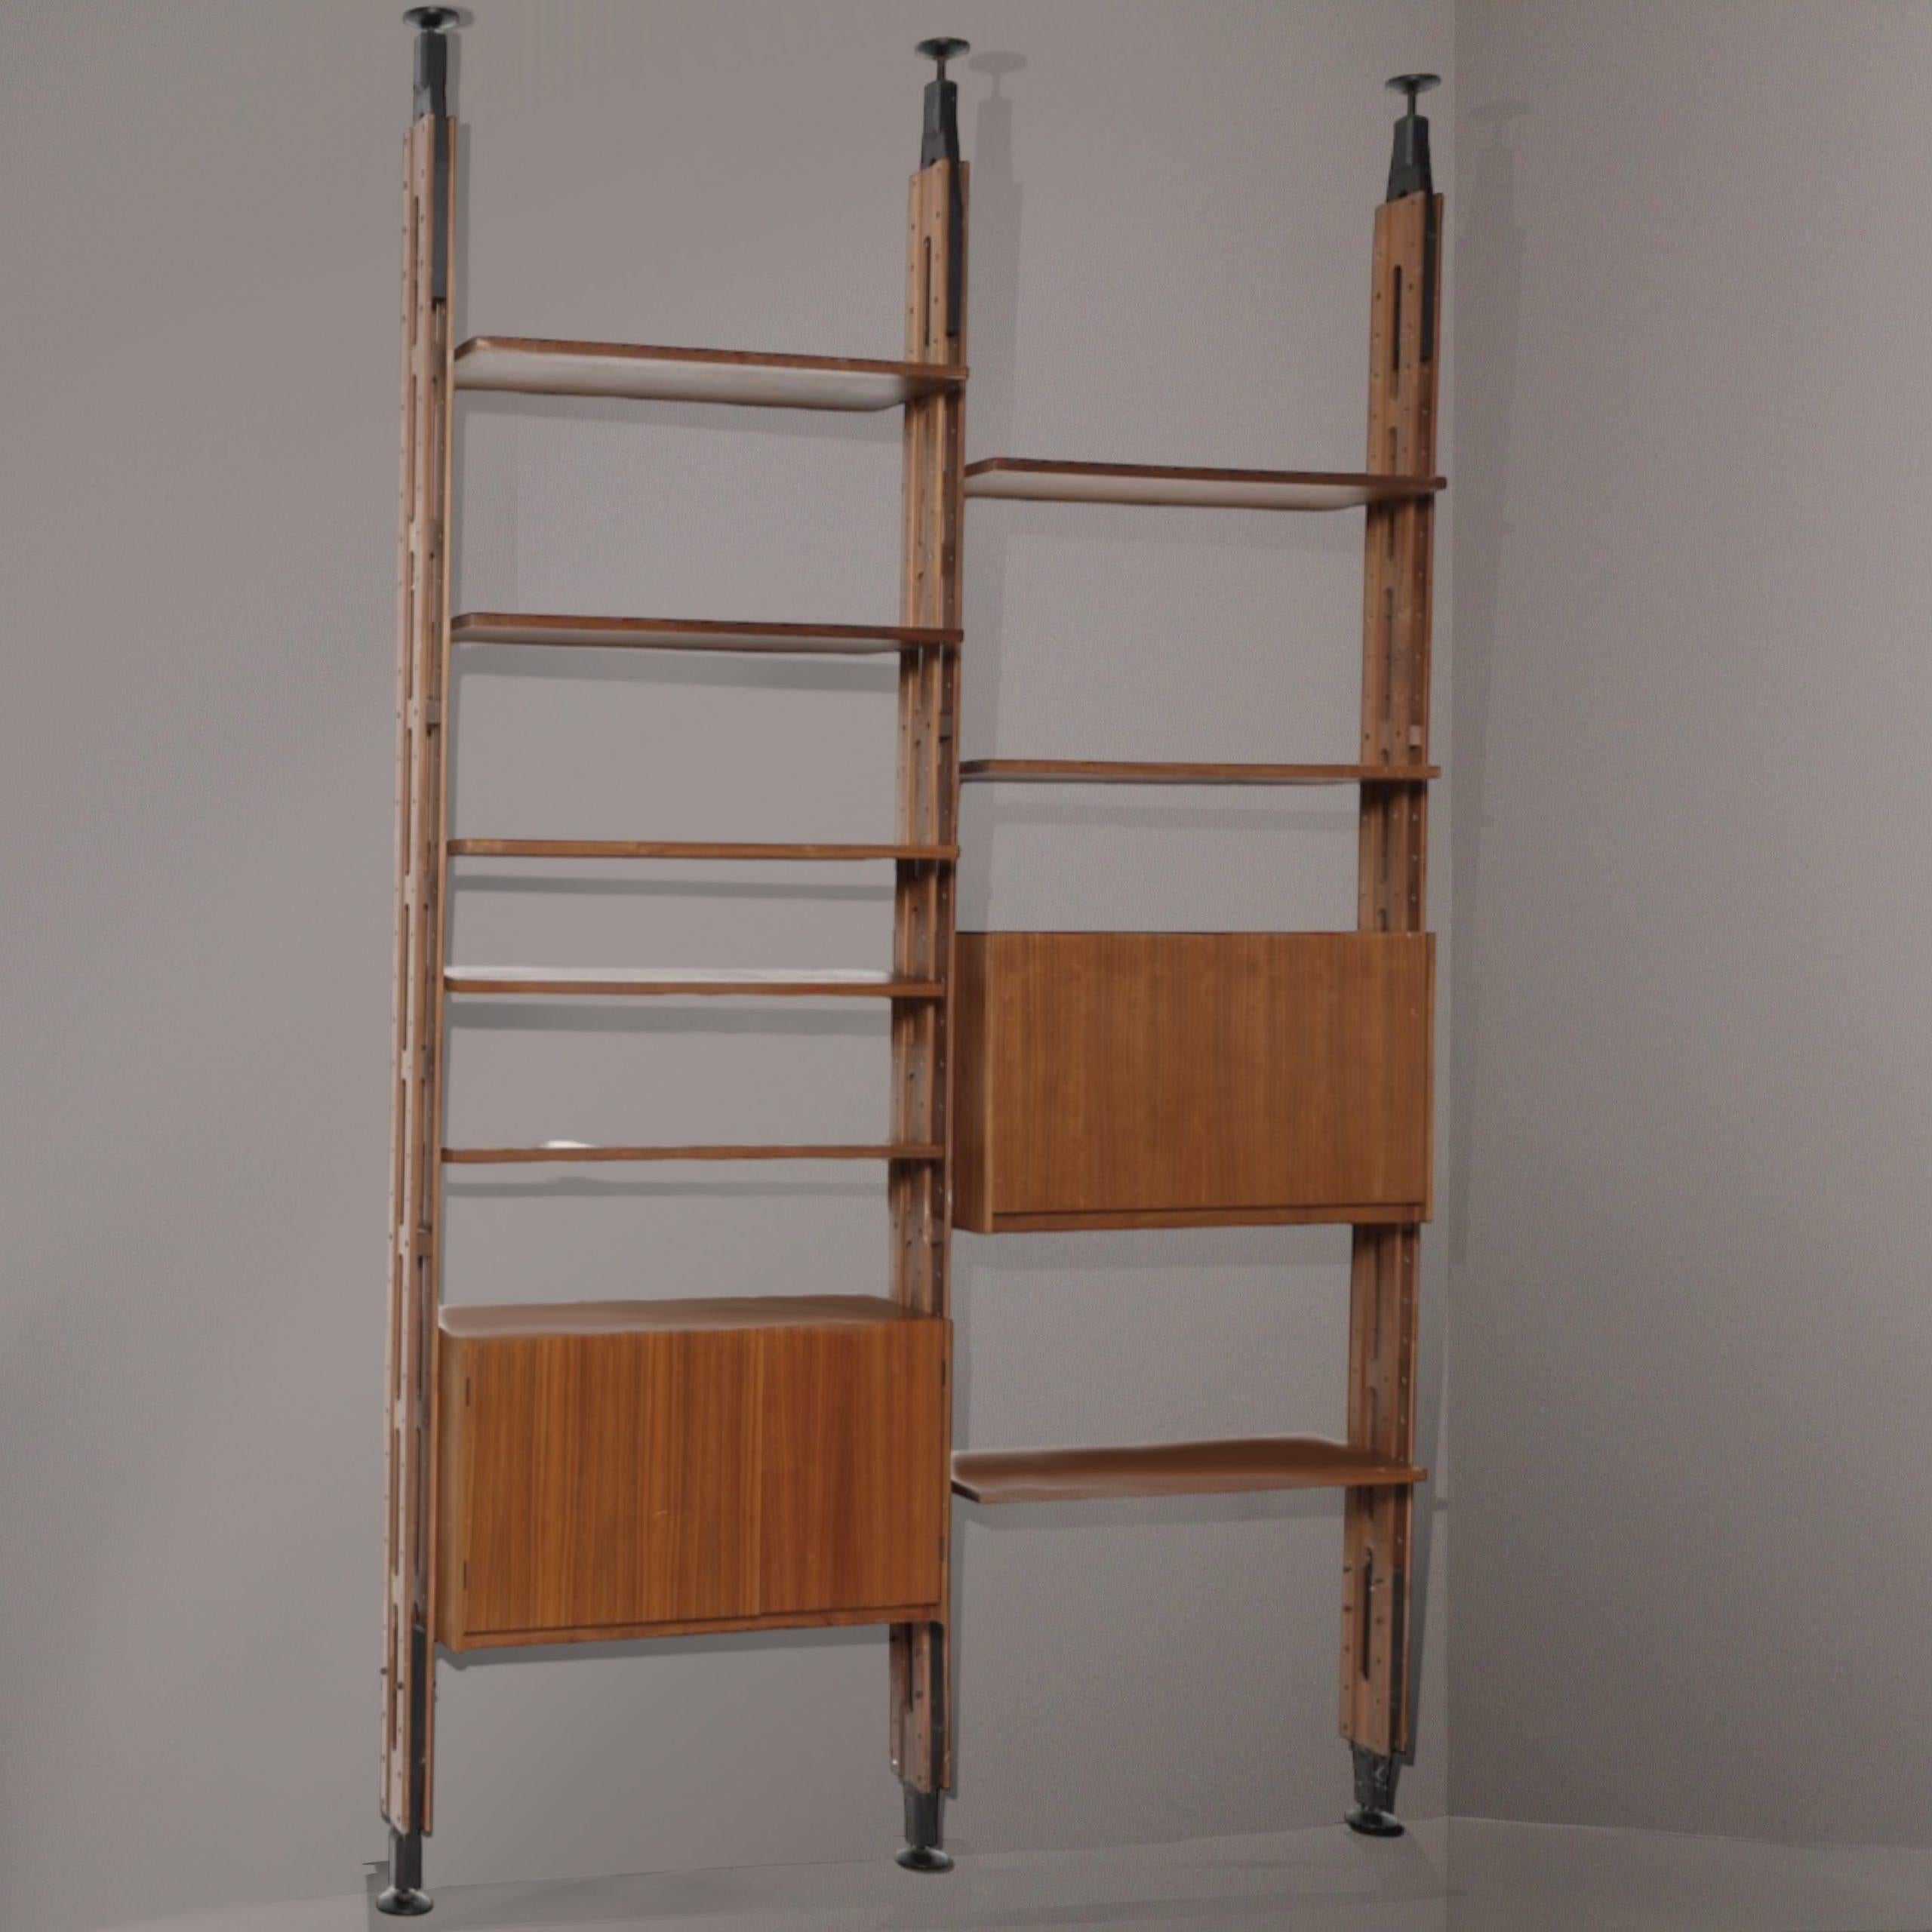 Paolo Tilche's Giraffe Bookcase, designed in the 1960s, is a masterpiece of Italian modernist design. Made of teak wood, this bookcase is renowned for its sturdiness and quality materials. The modular design, available in 2-, 3-, or 4-bay versions,